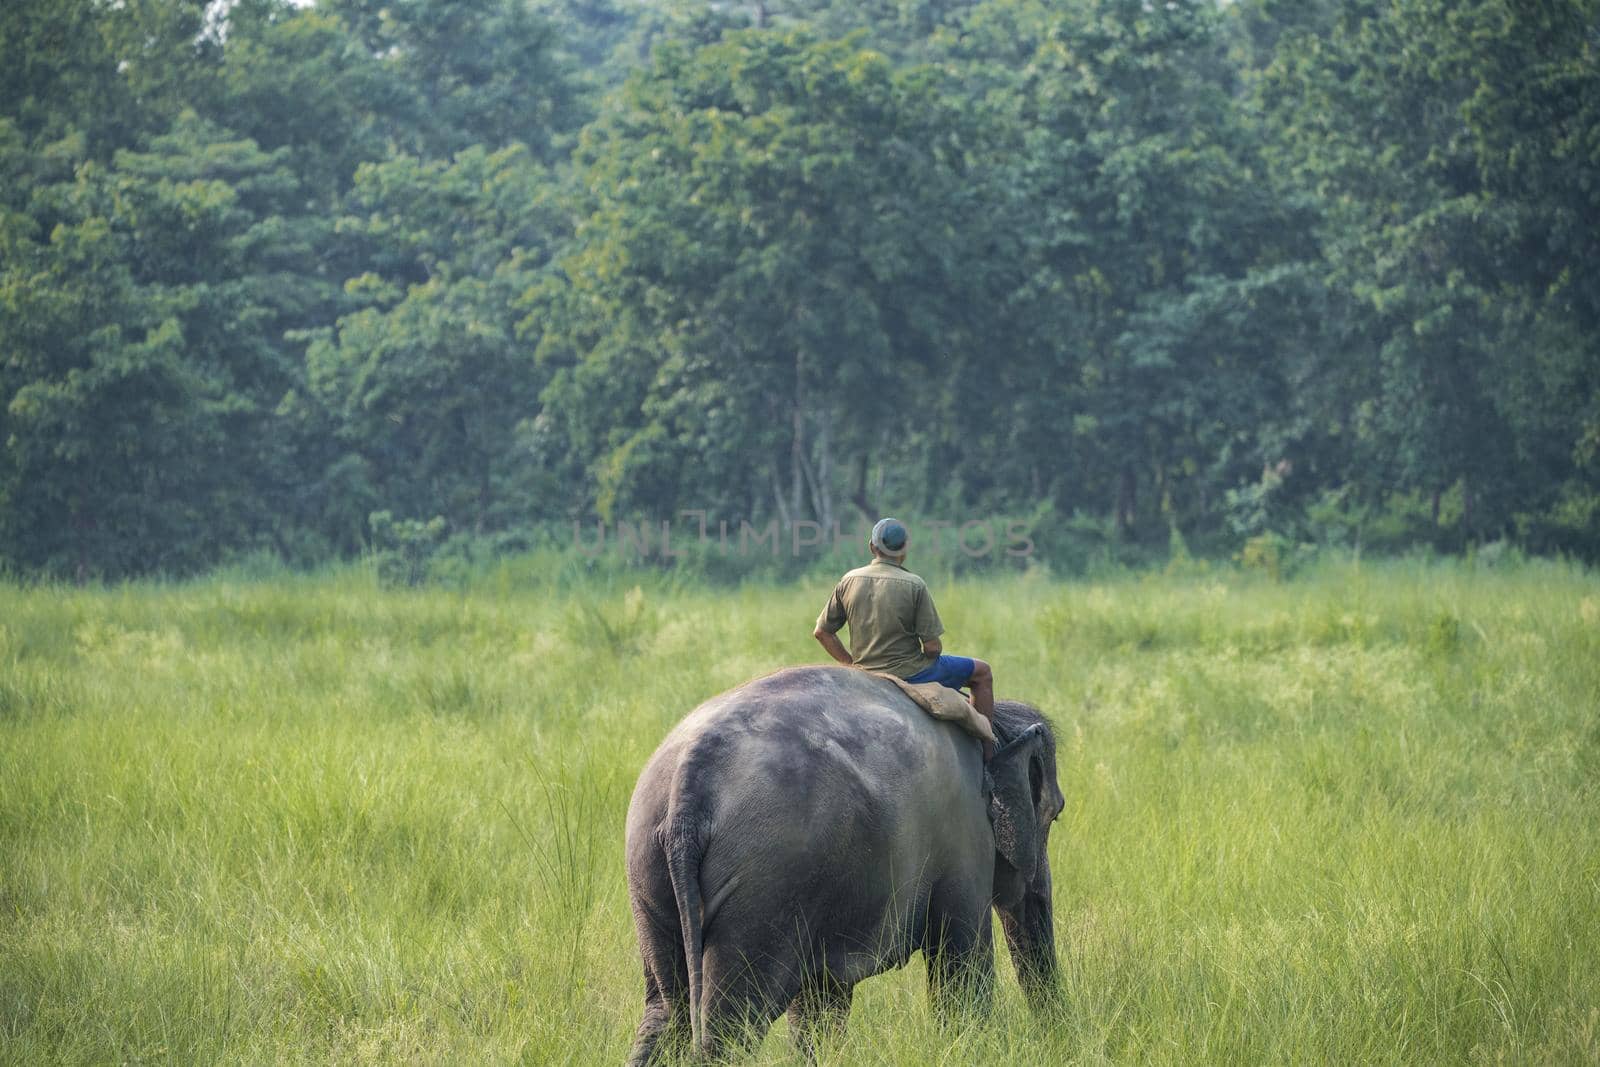 Mahout or elephant rider riding a female elephant by Arsgera